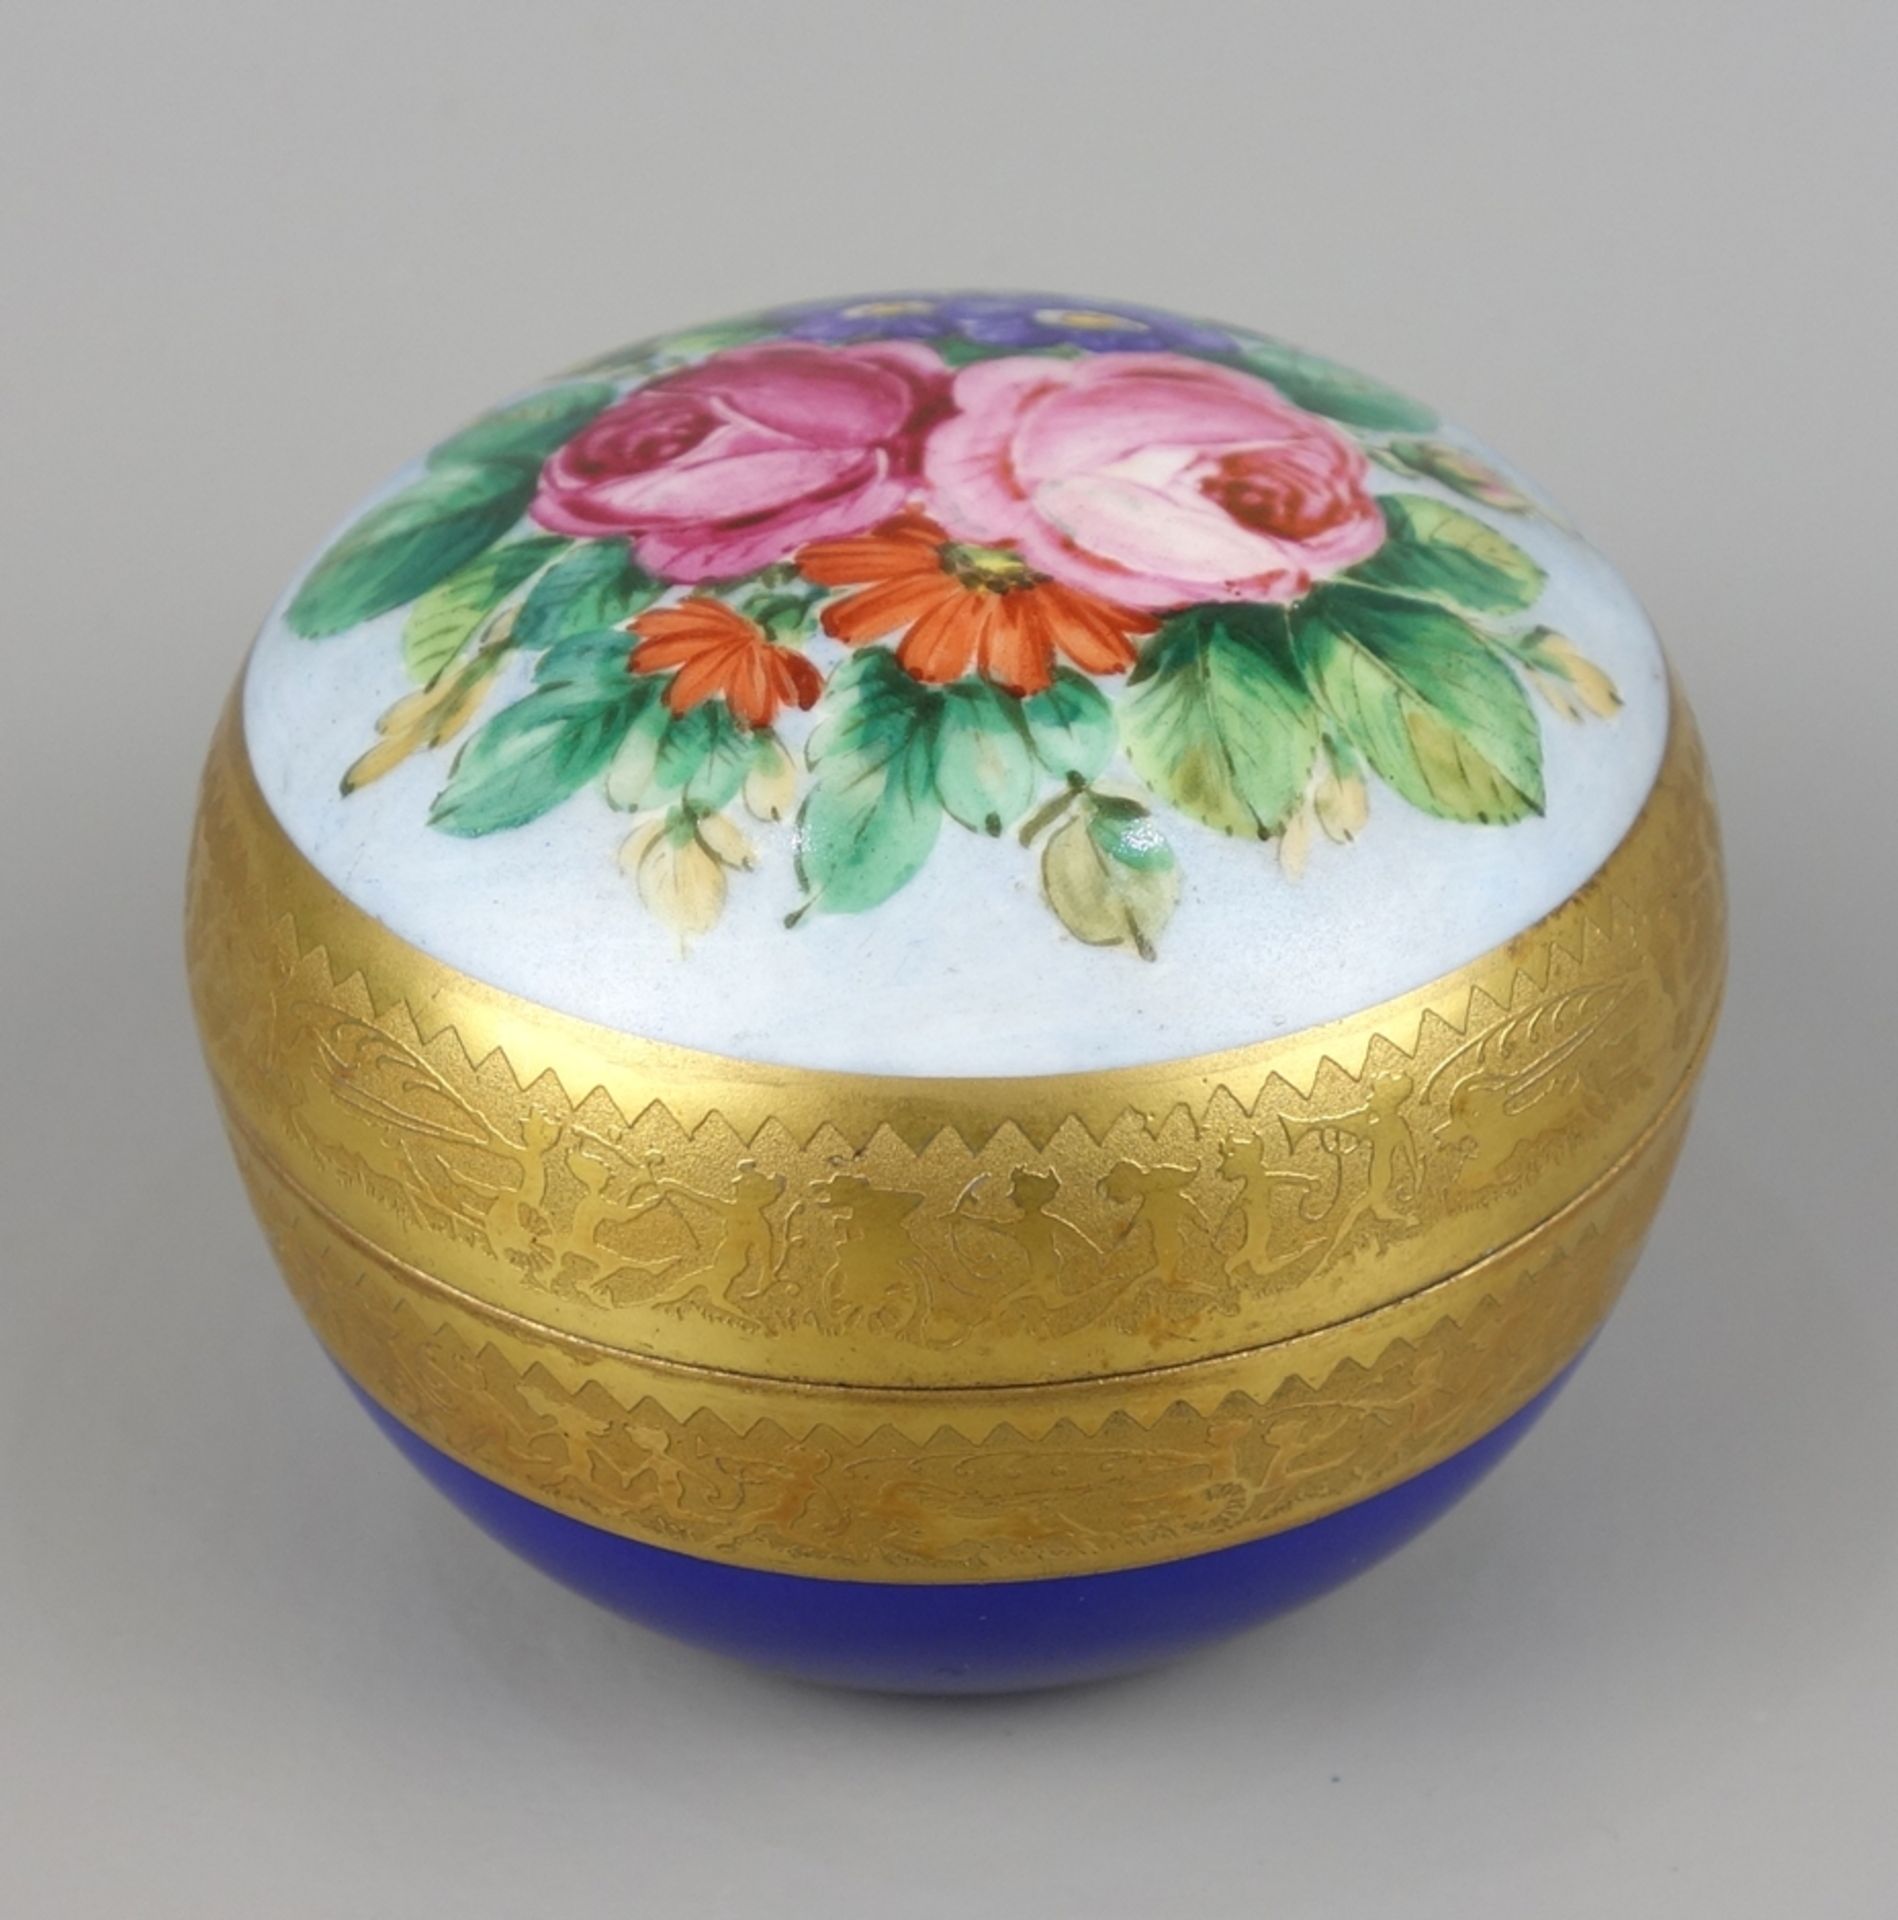 Box with etched gold rim, OEPIAG, Pirkenhammer, c. 1890